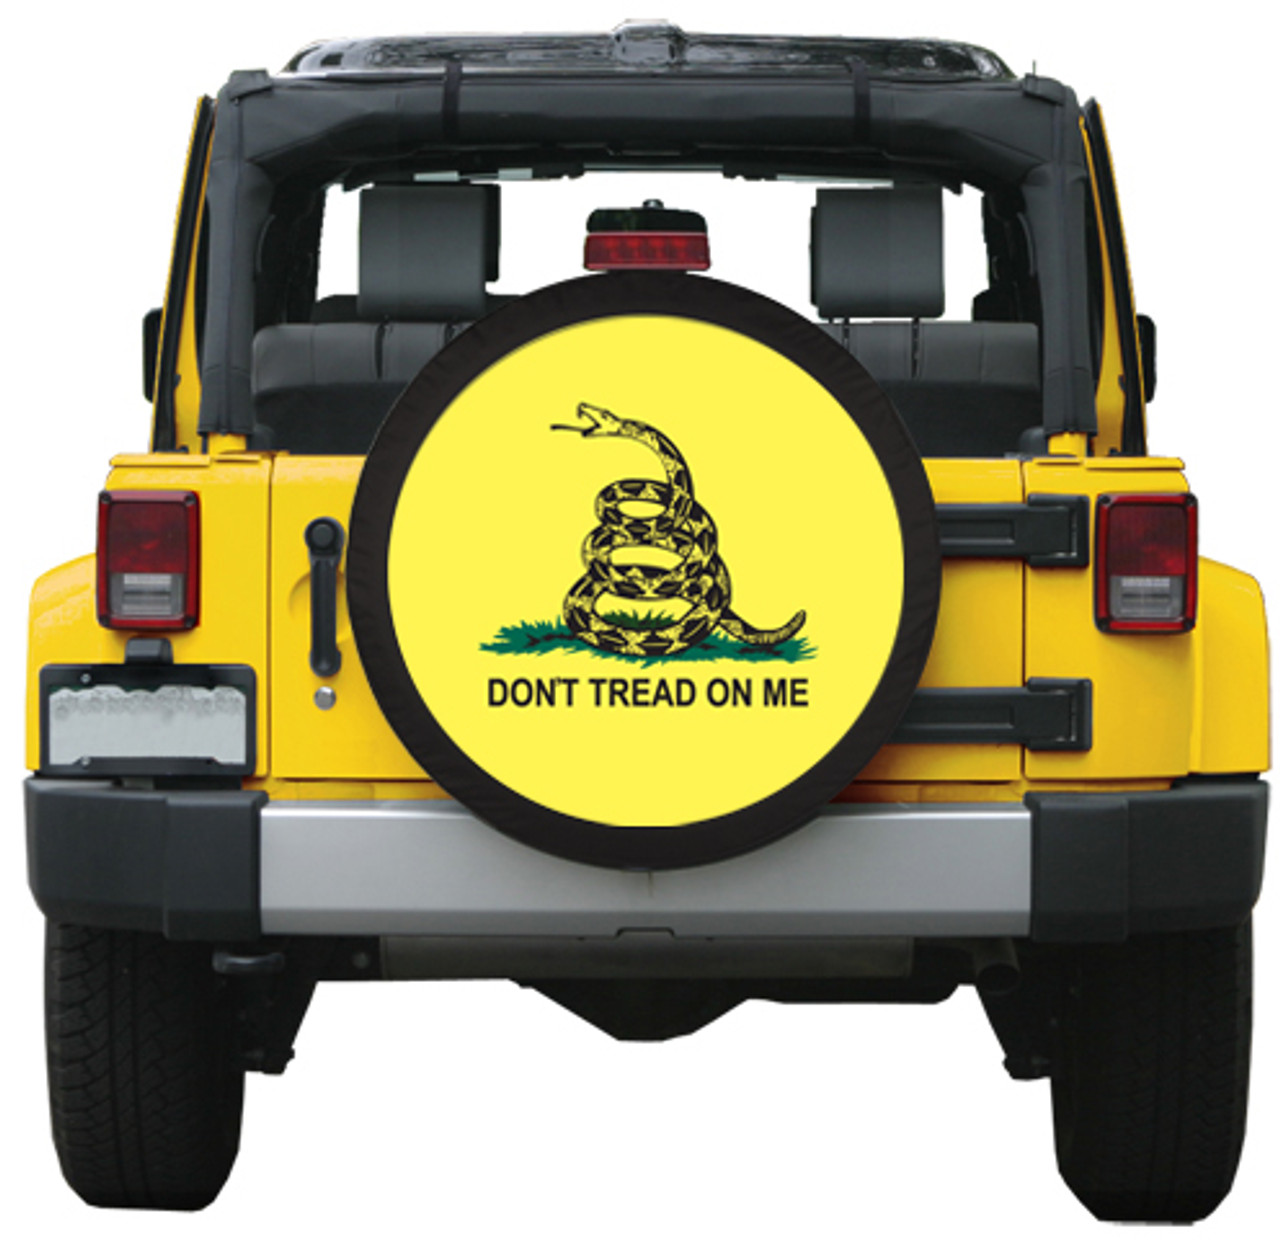 Boomerang Printed Soft Tire Cover – Don't Tread on Me